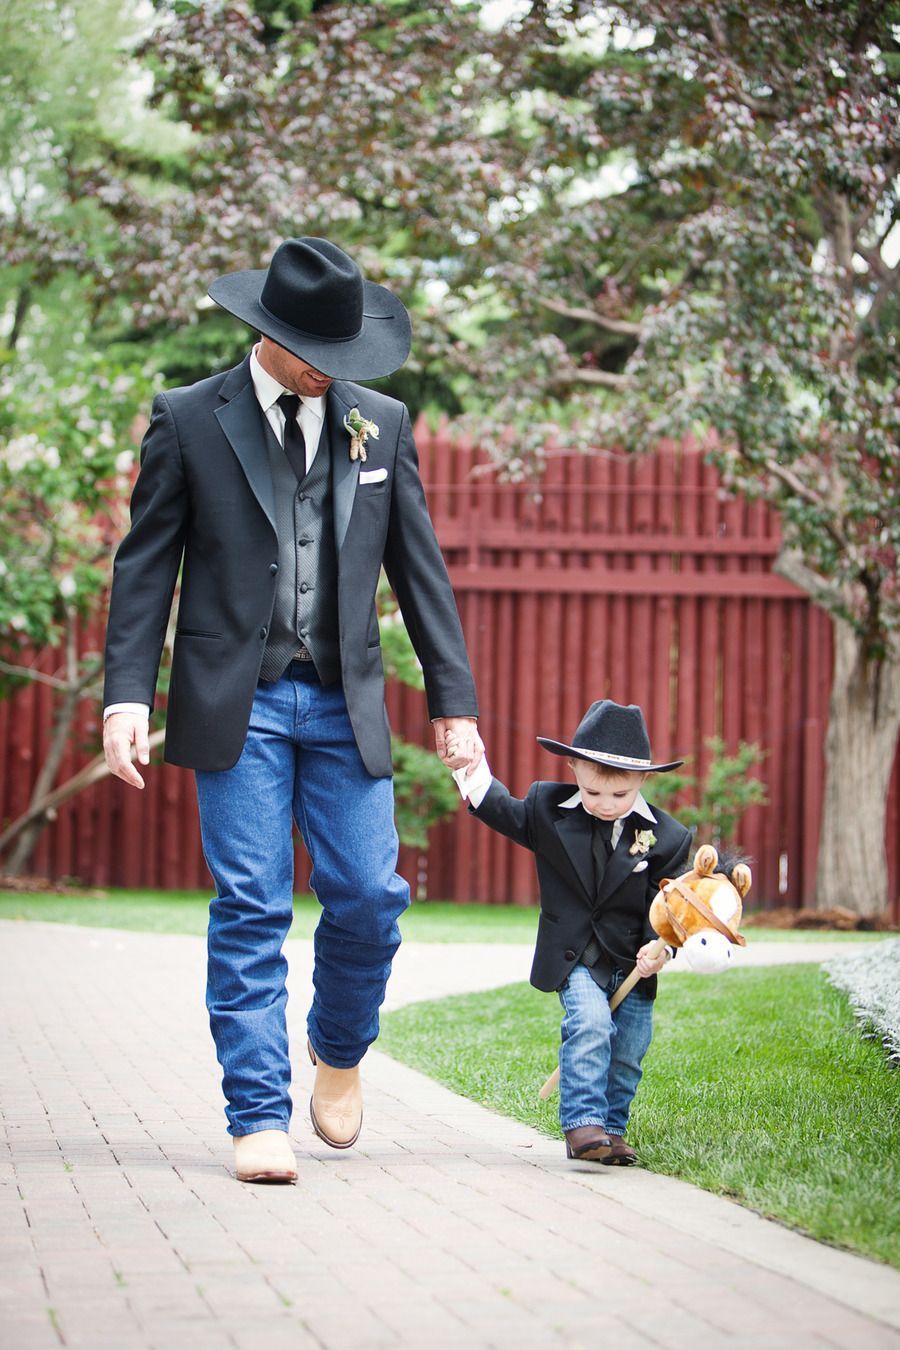 @Cassie Miller ….. Chance and Cash… maybe minus the hats, but thought this was adorable